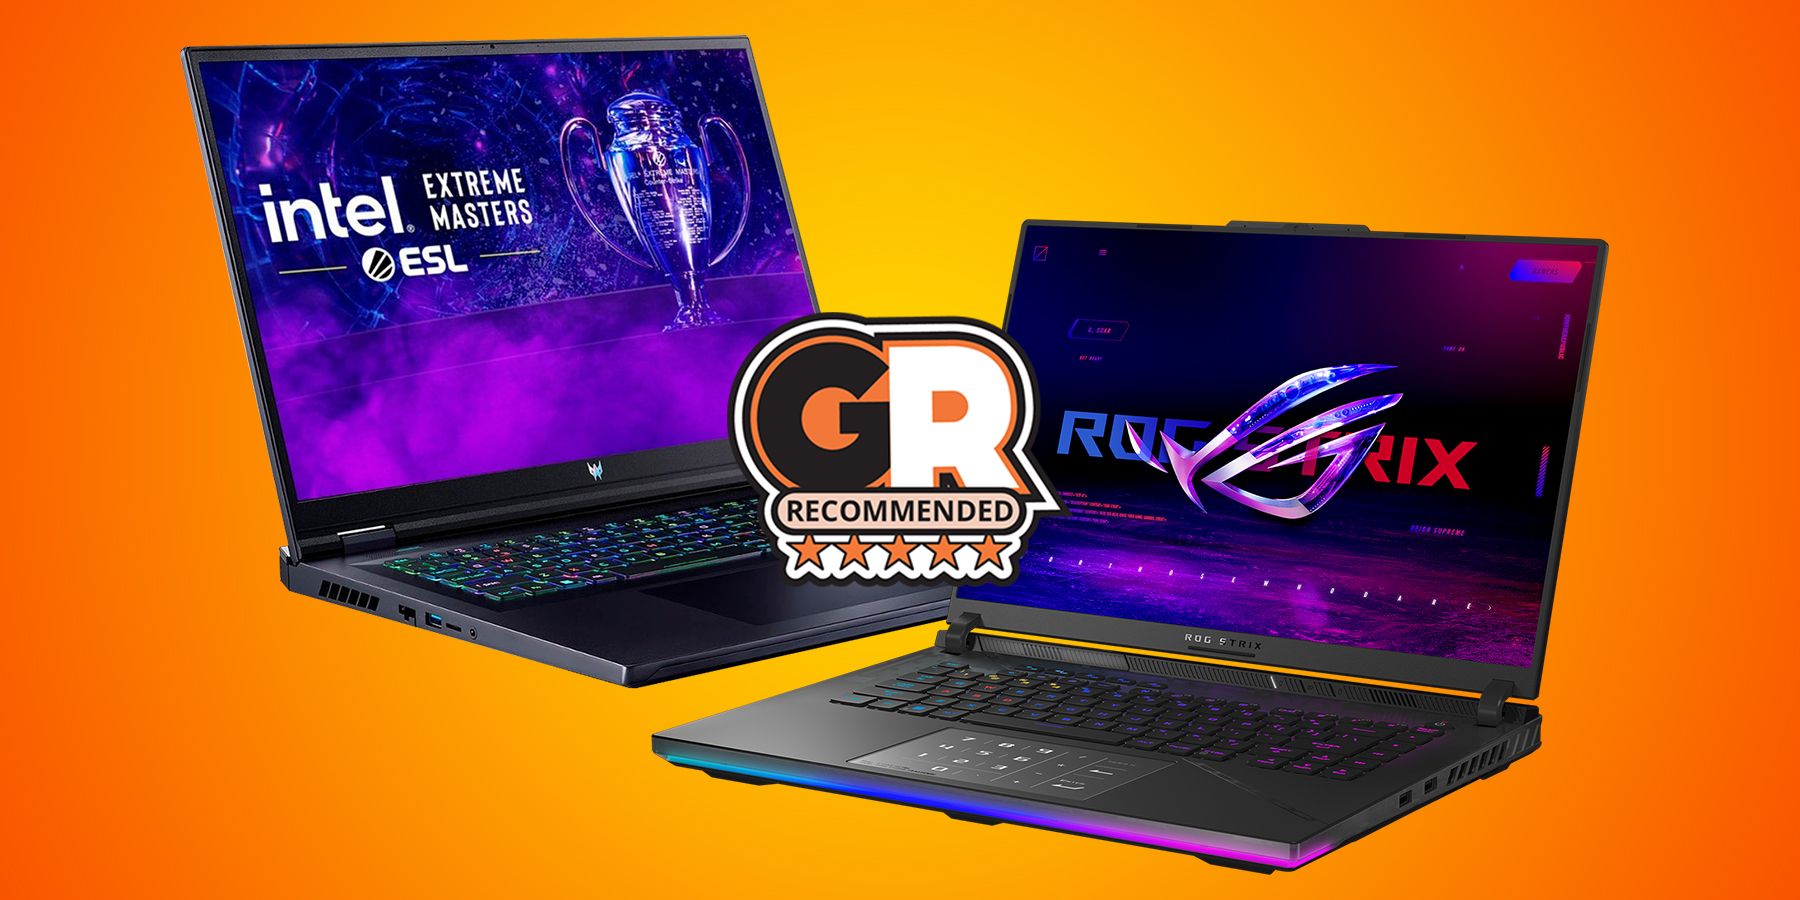 Asus vs Acer: Which Brand Makes Better Laptops?